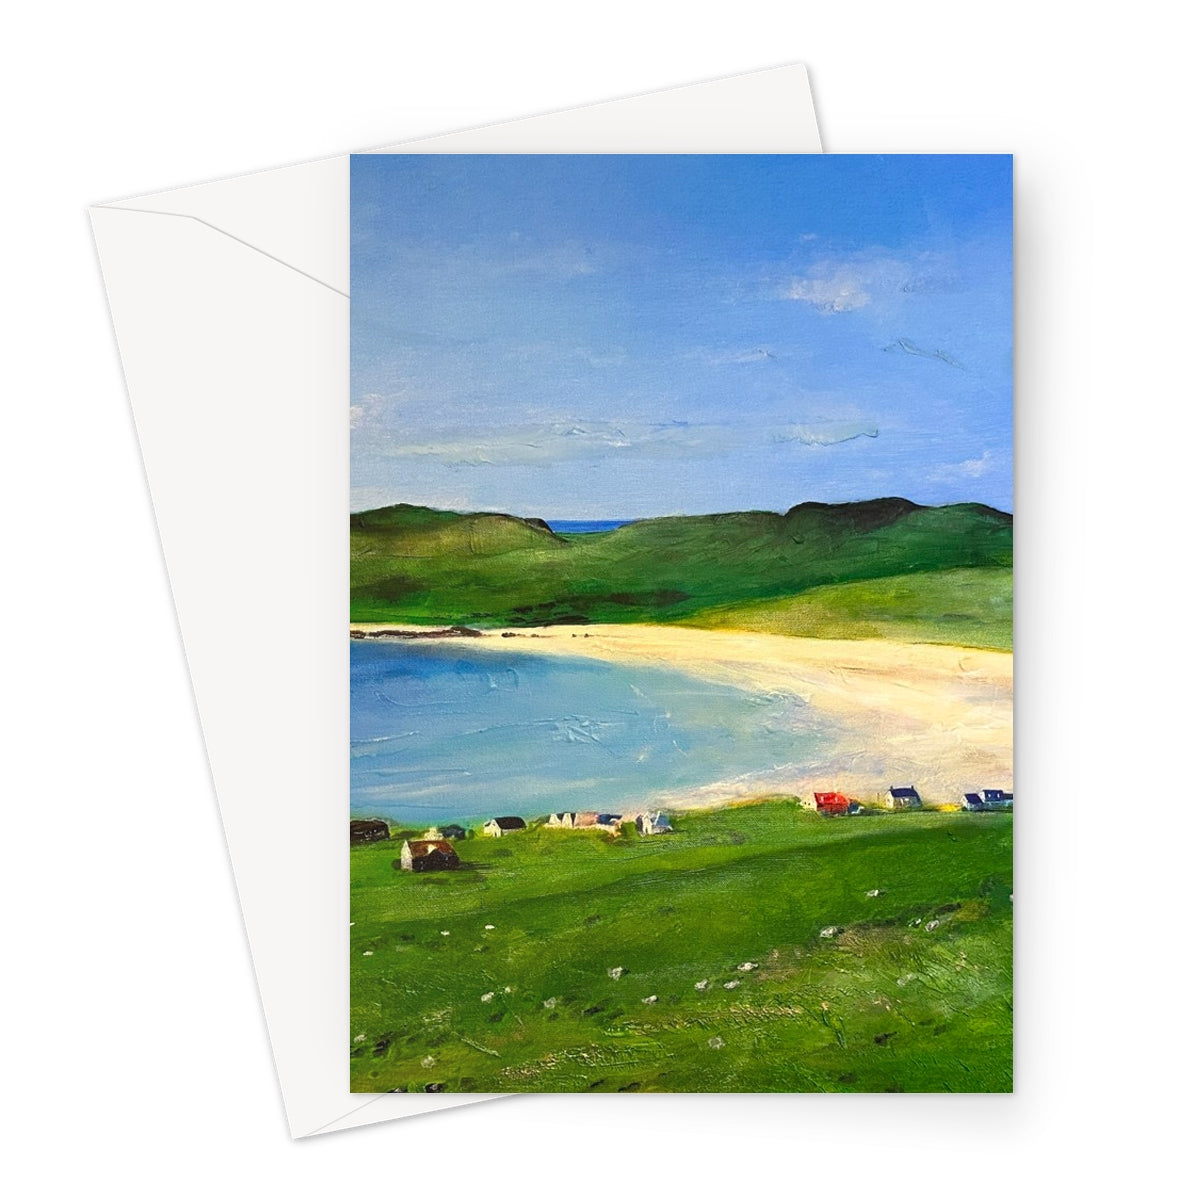 Balephuil Beach Tiree Art Gifts Greeting Card-Greetings Cards-Hebridean Islands Art Gallery-A5 Portrait-10 Cards-Paintings, Prints, Homeware, Art Gifts From Scotland By Scottish Artist Kevin Hunter